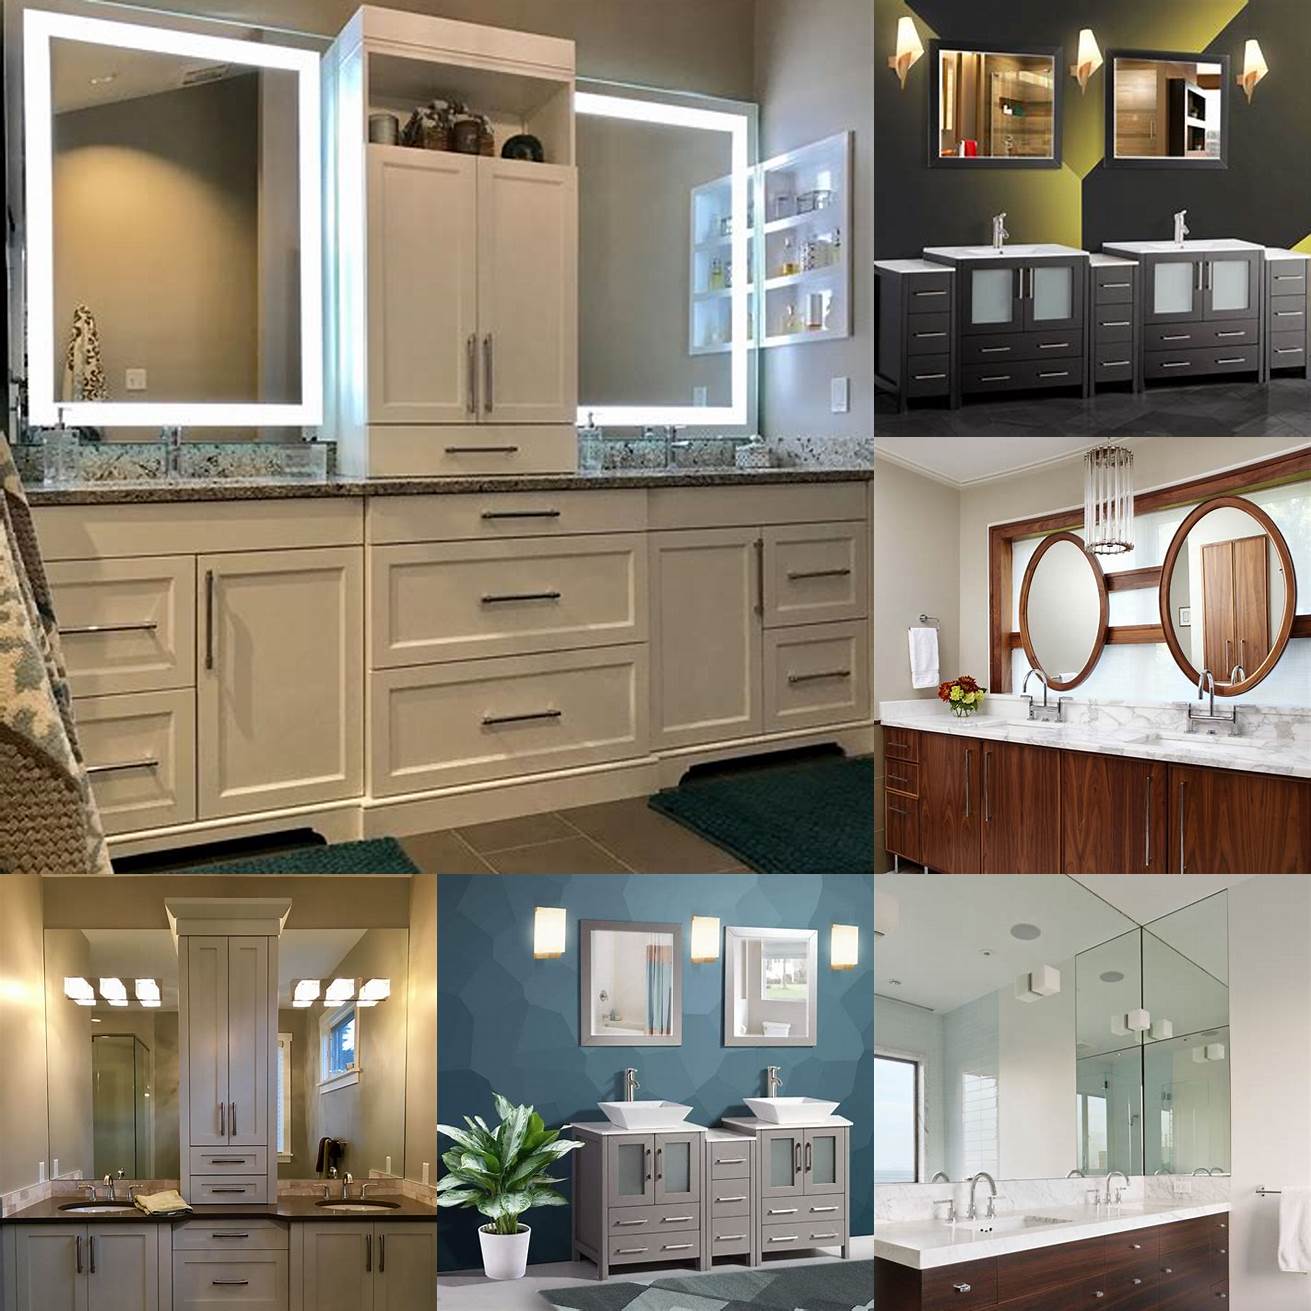 A double bathroom vanity mirror cabinet can provide ample storage space and accommodate two people at once